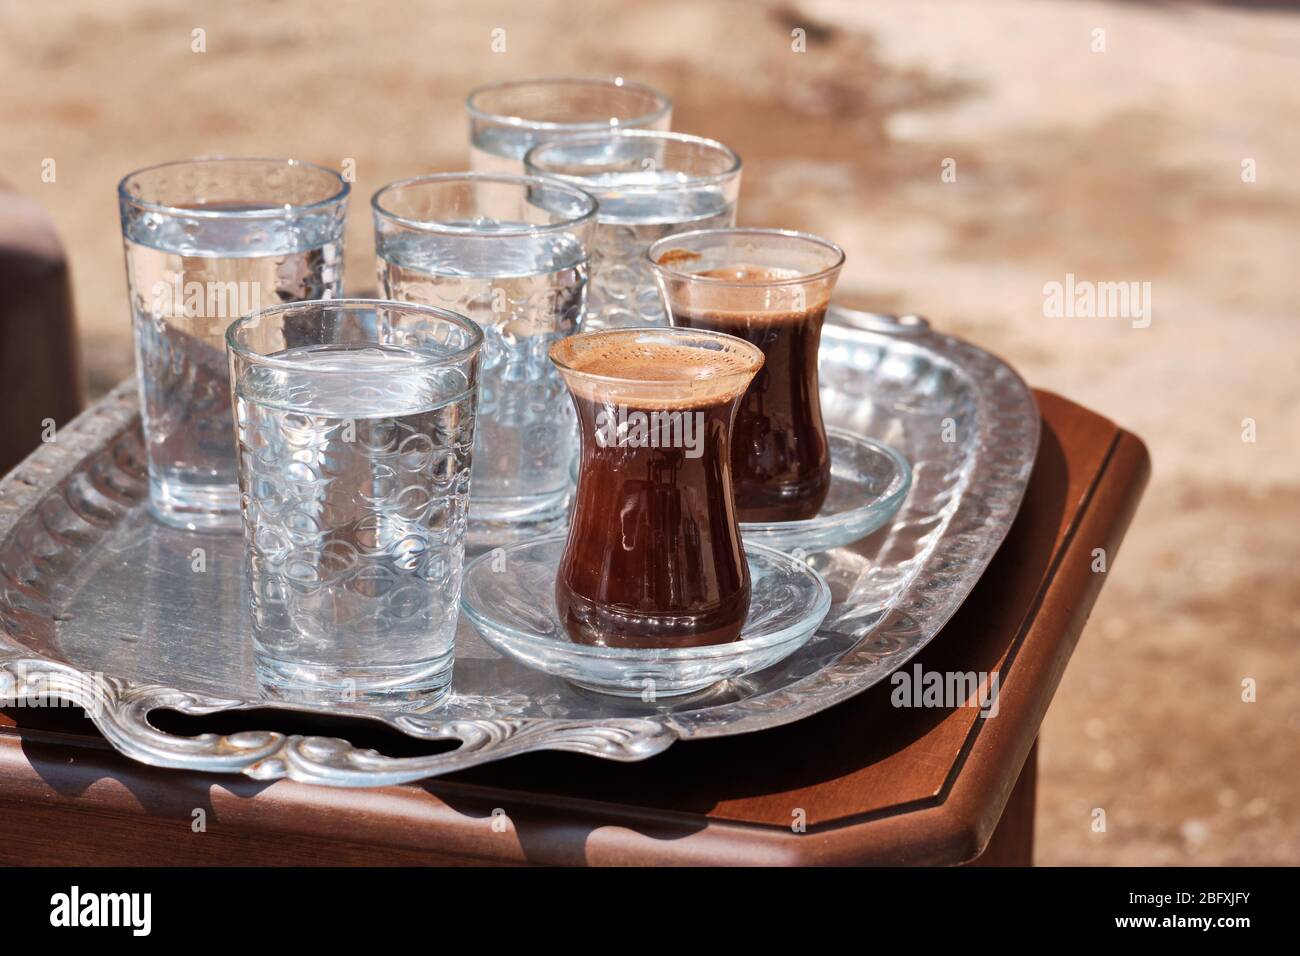 Glasses of water and Turkish coffee are on a metal tray Stock Photo - Alamy